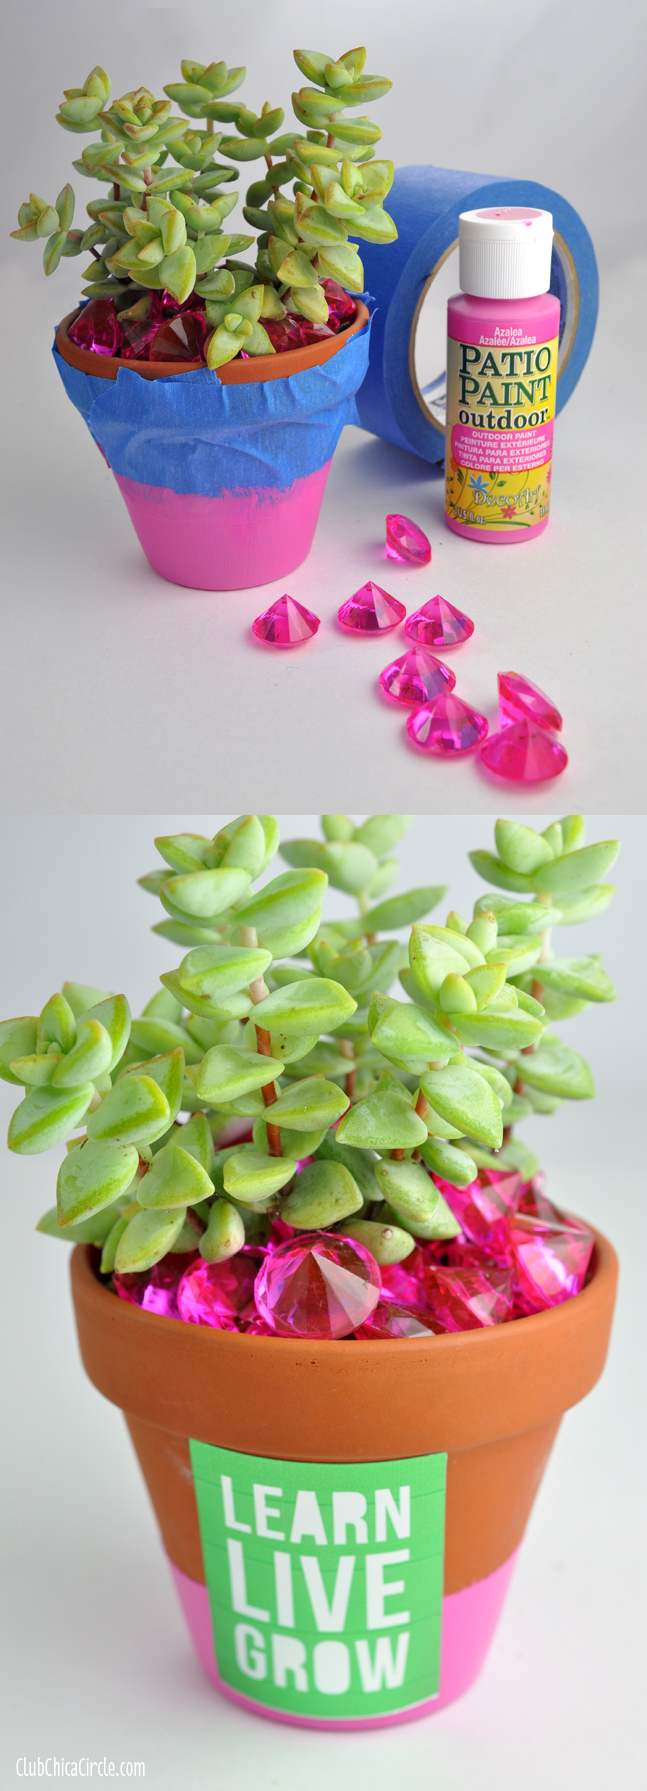 Succulent Plant Spring Gift Idea with Patio Paint, Gems and Silhouette metallic stickers